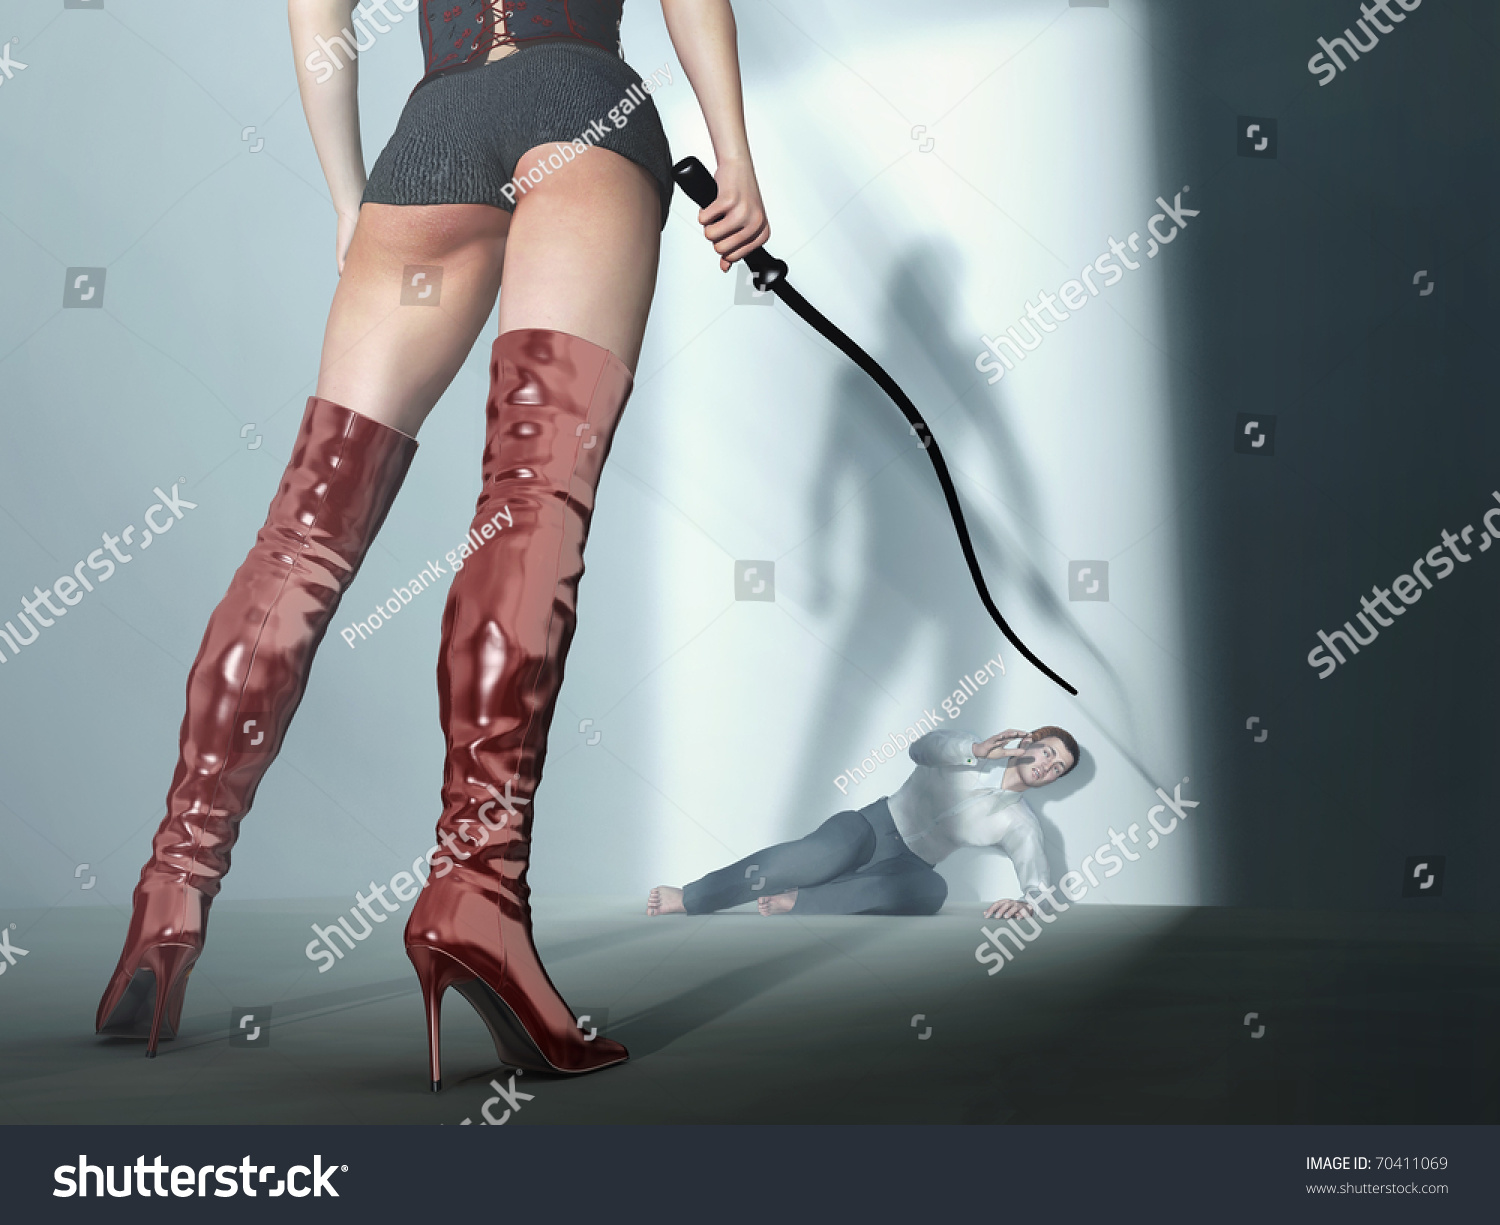 Whipping woman